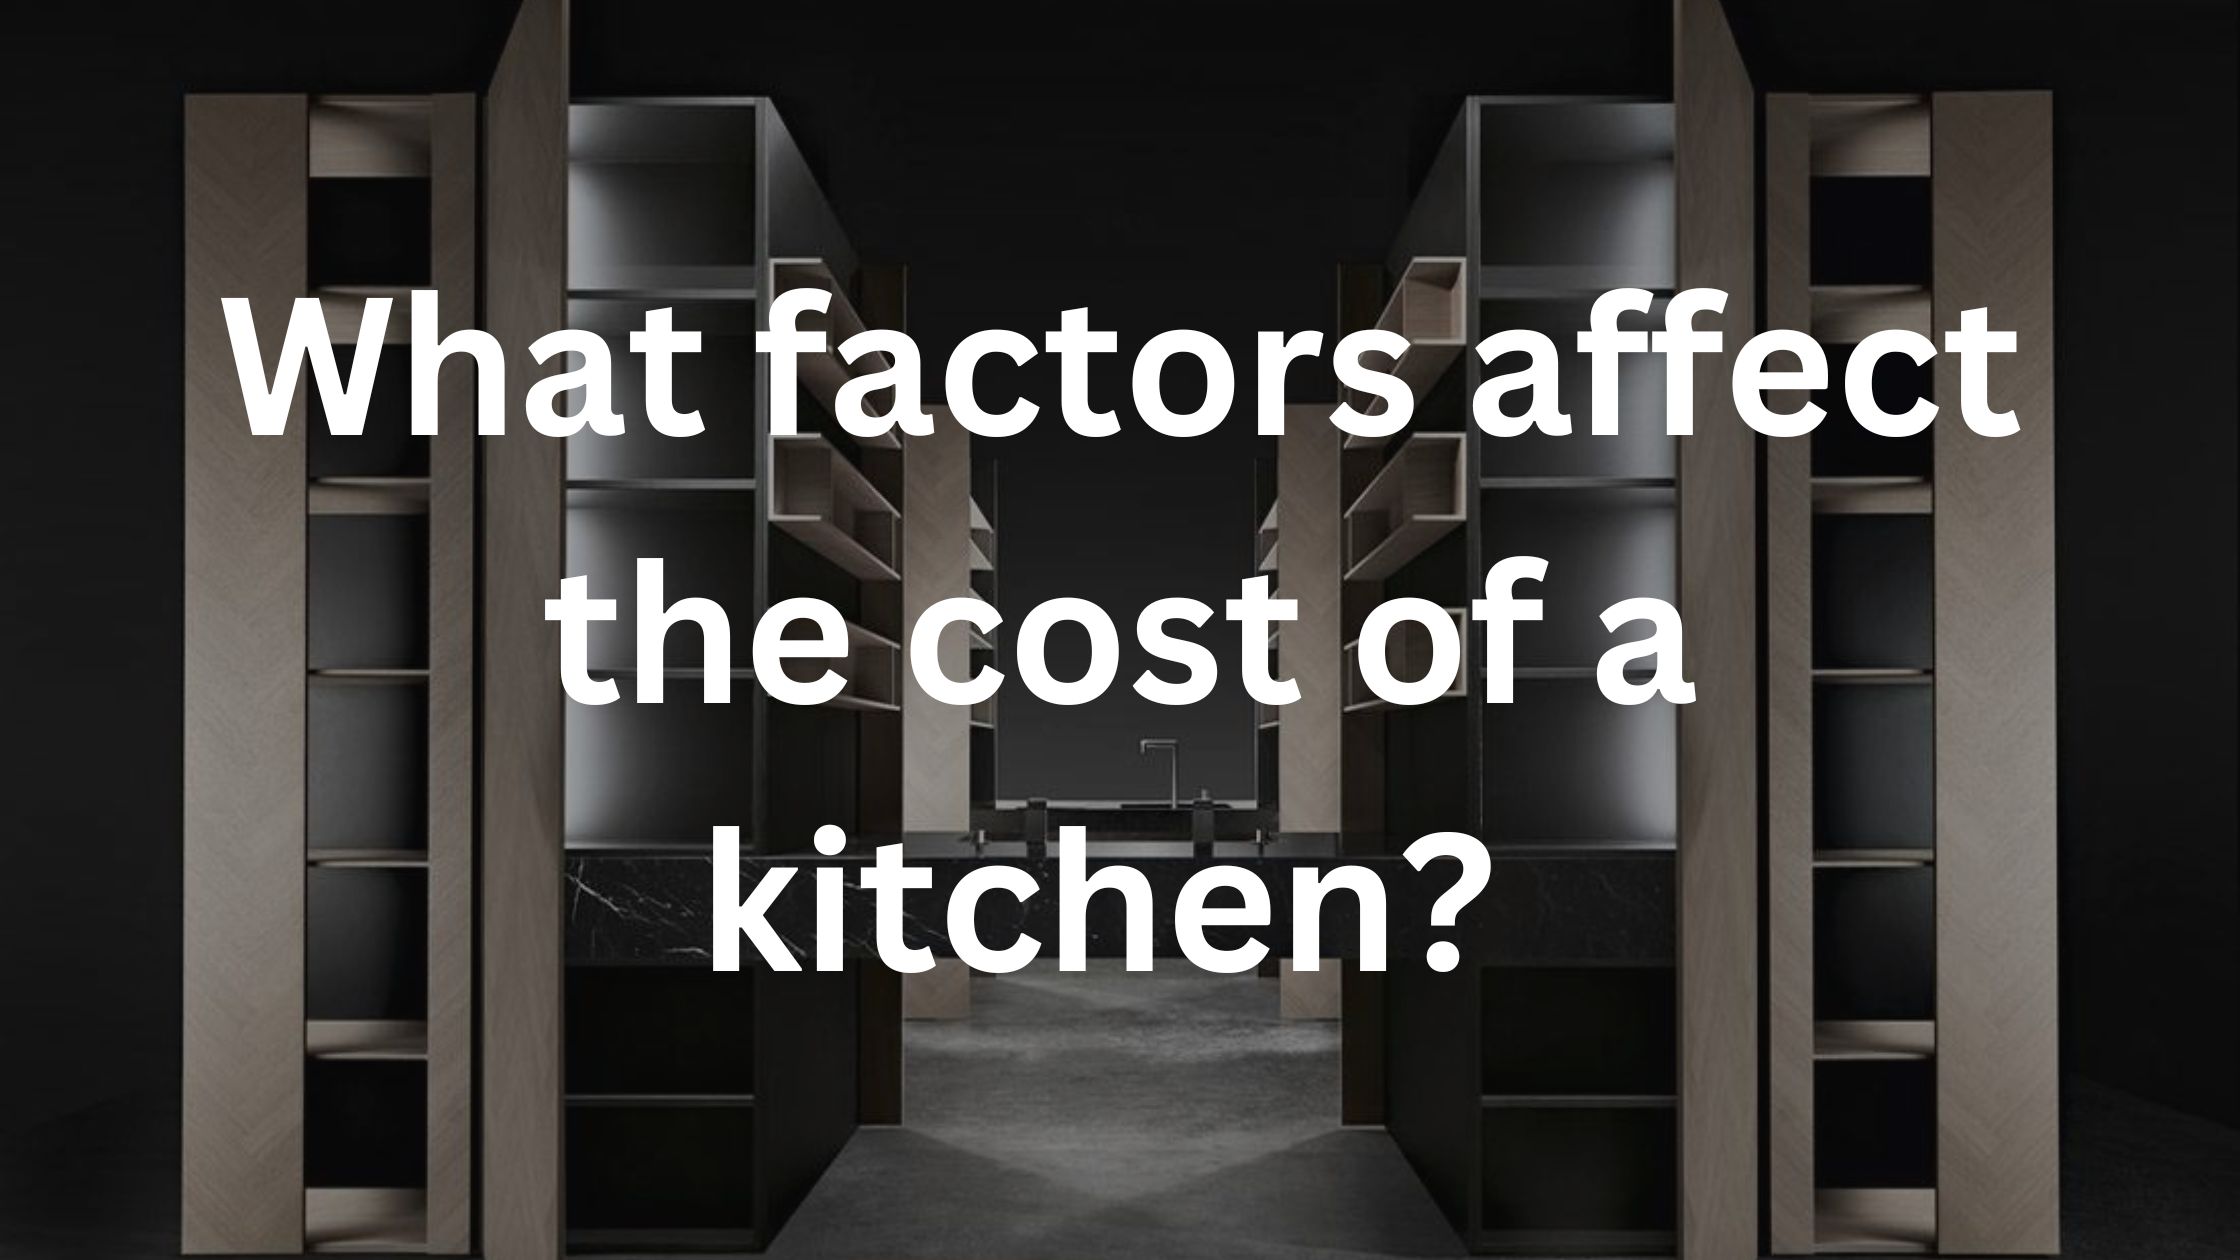 What factors affect the cost of a kitchen?